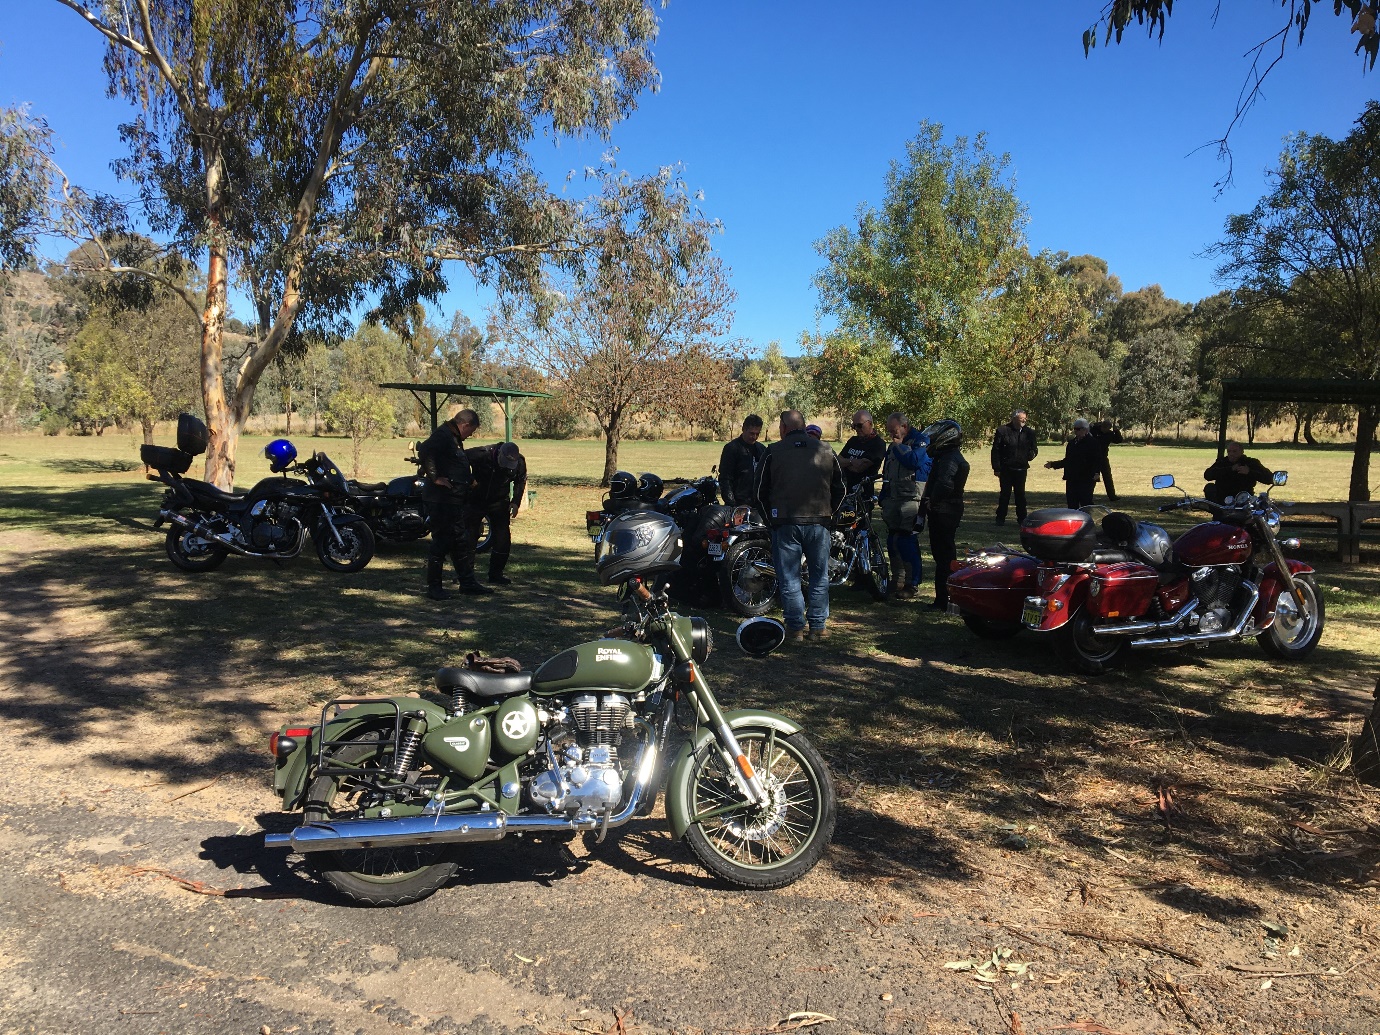 A group of motorcycles parked on the side of a road

Description automatically generated with low confidence